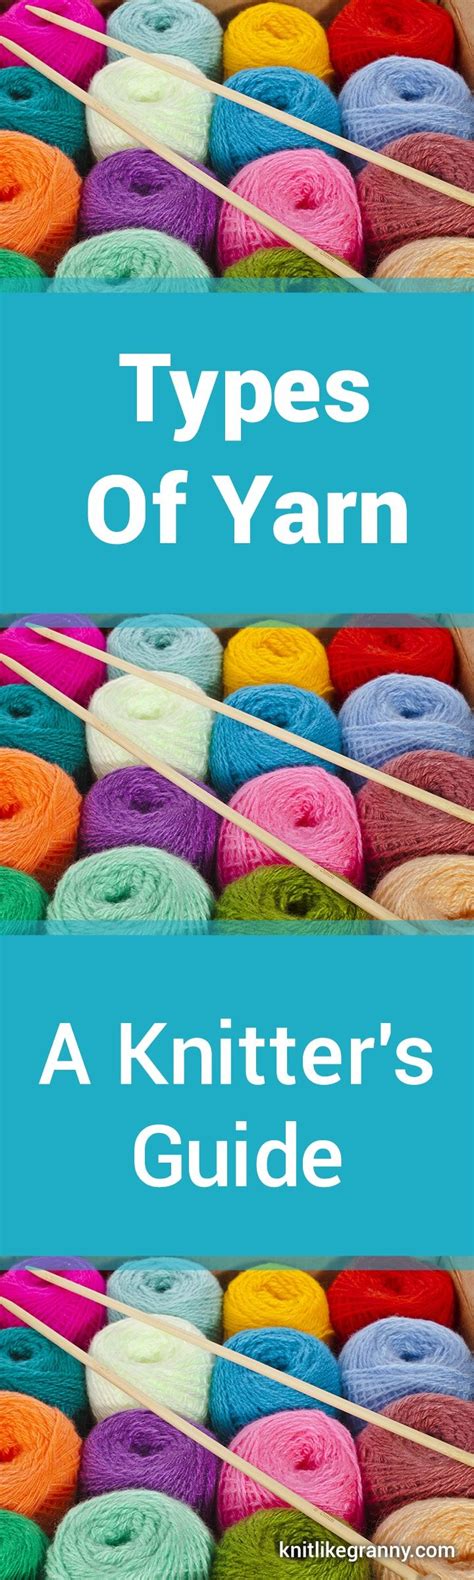 Types Of Yarn A Guide To Yarn Types And Different Types Of Yarn